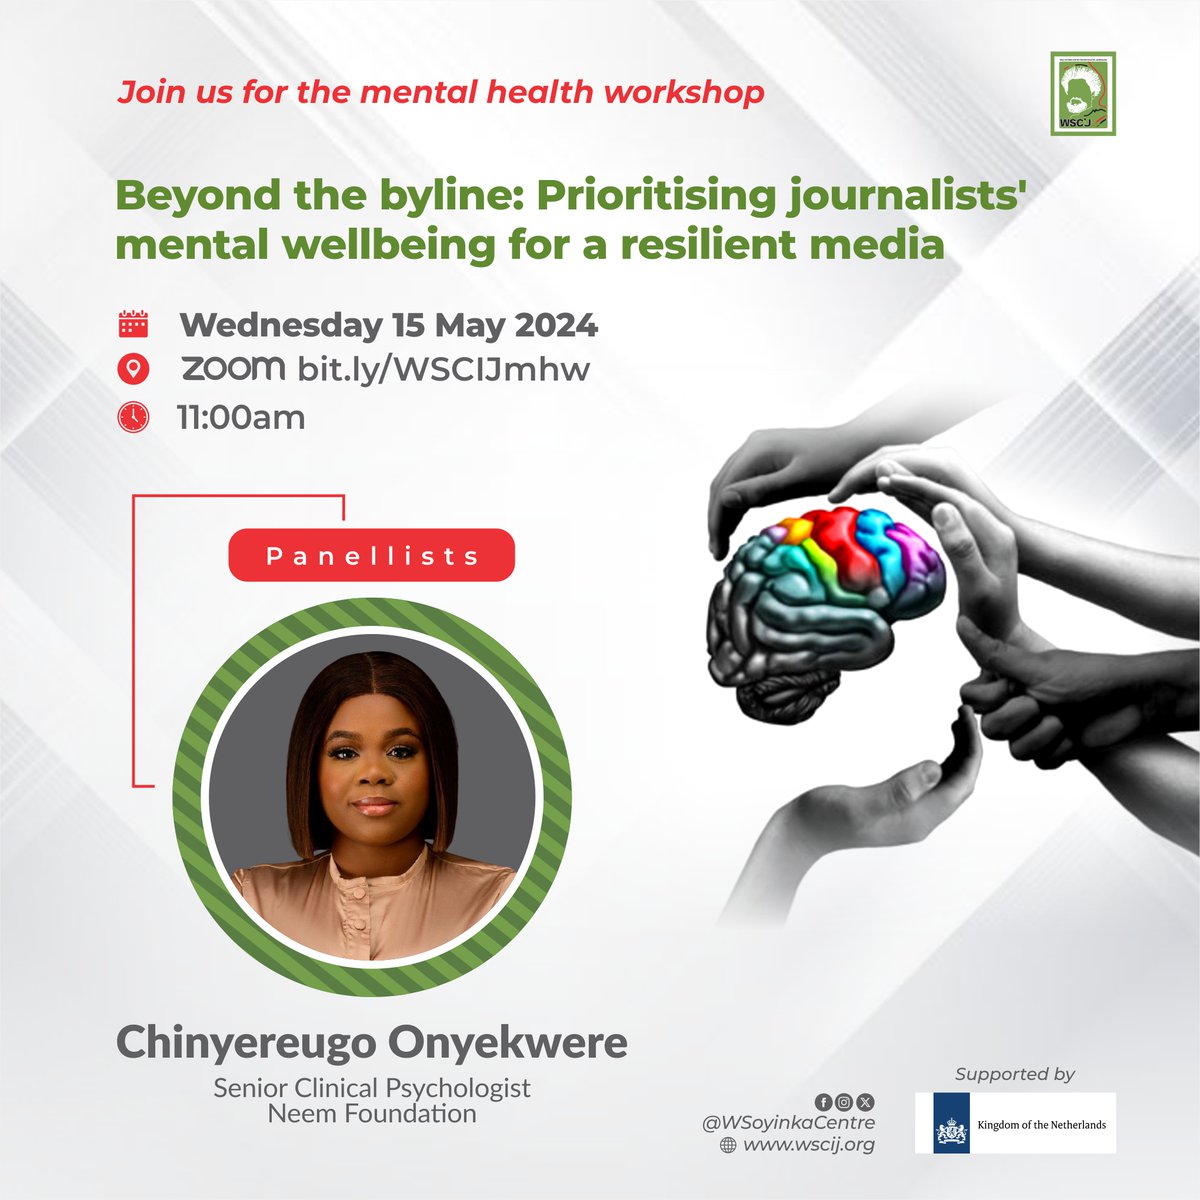 What are the common mental health issues faced by investigative journalists? What are the symptoms? How can journalists take care of their mental health? Join Chinyereugo Onyekwere at #mentalhealth workshop organised @WSoyinkaCentre for answers. Register👉 bit.ly/WSCIJmhw